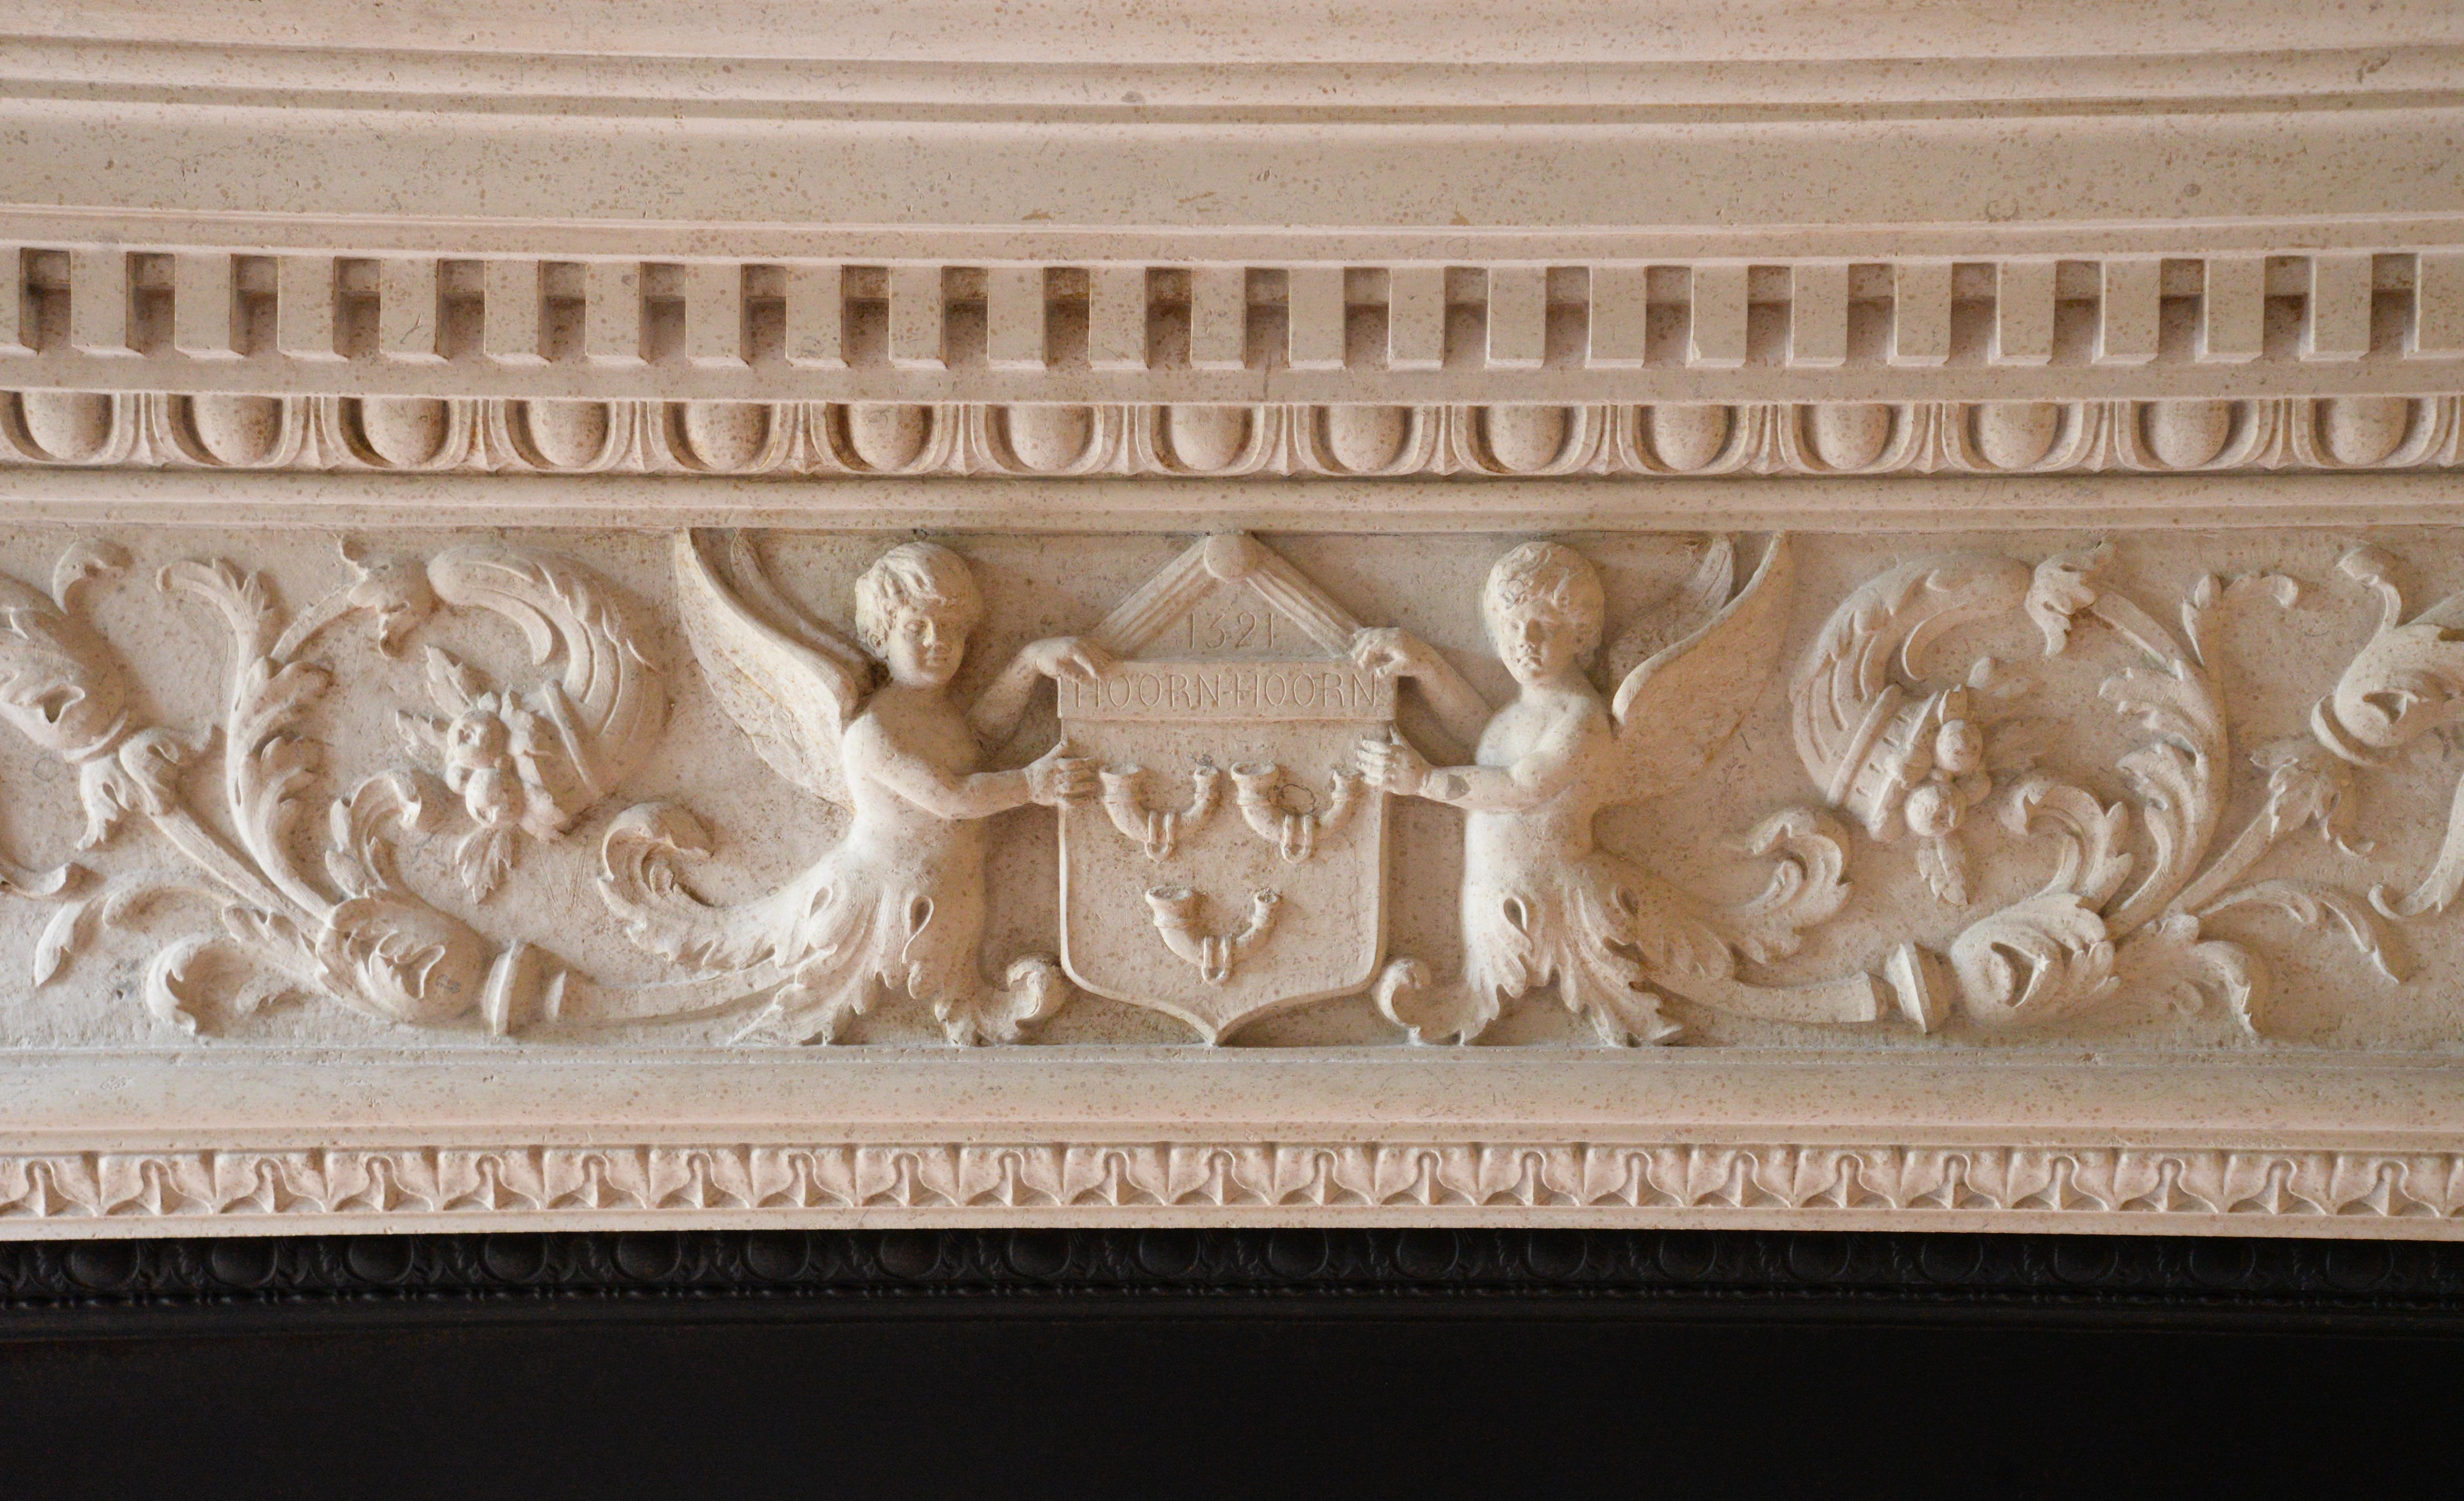 This monumental fireplace was carved in stone around 1905 in a Neo-Renaissance style.
It is supported by two detached columns composed of two orders from the Roman antiquity, the Ionic order with the scrolls and the Corinthian order characterized